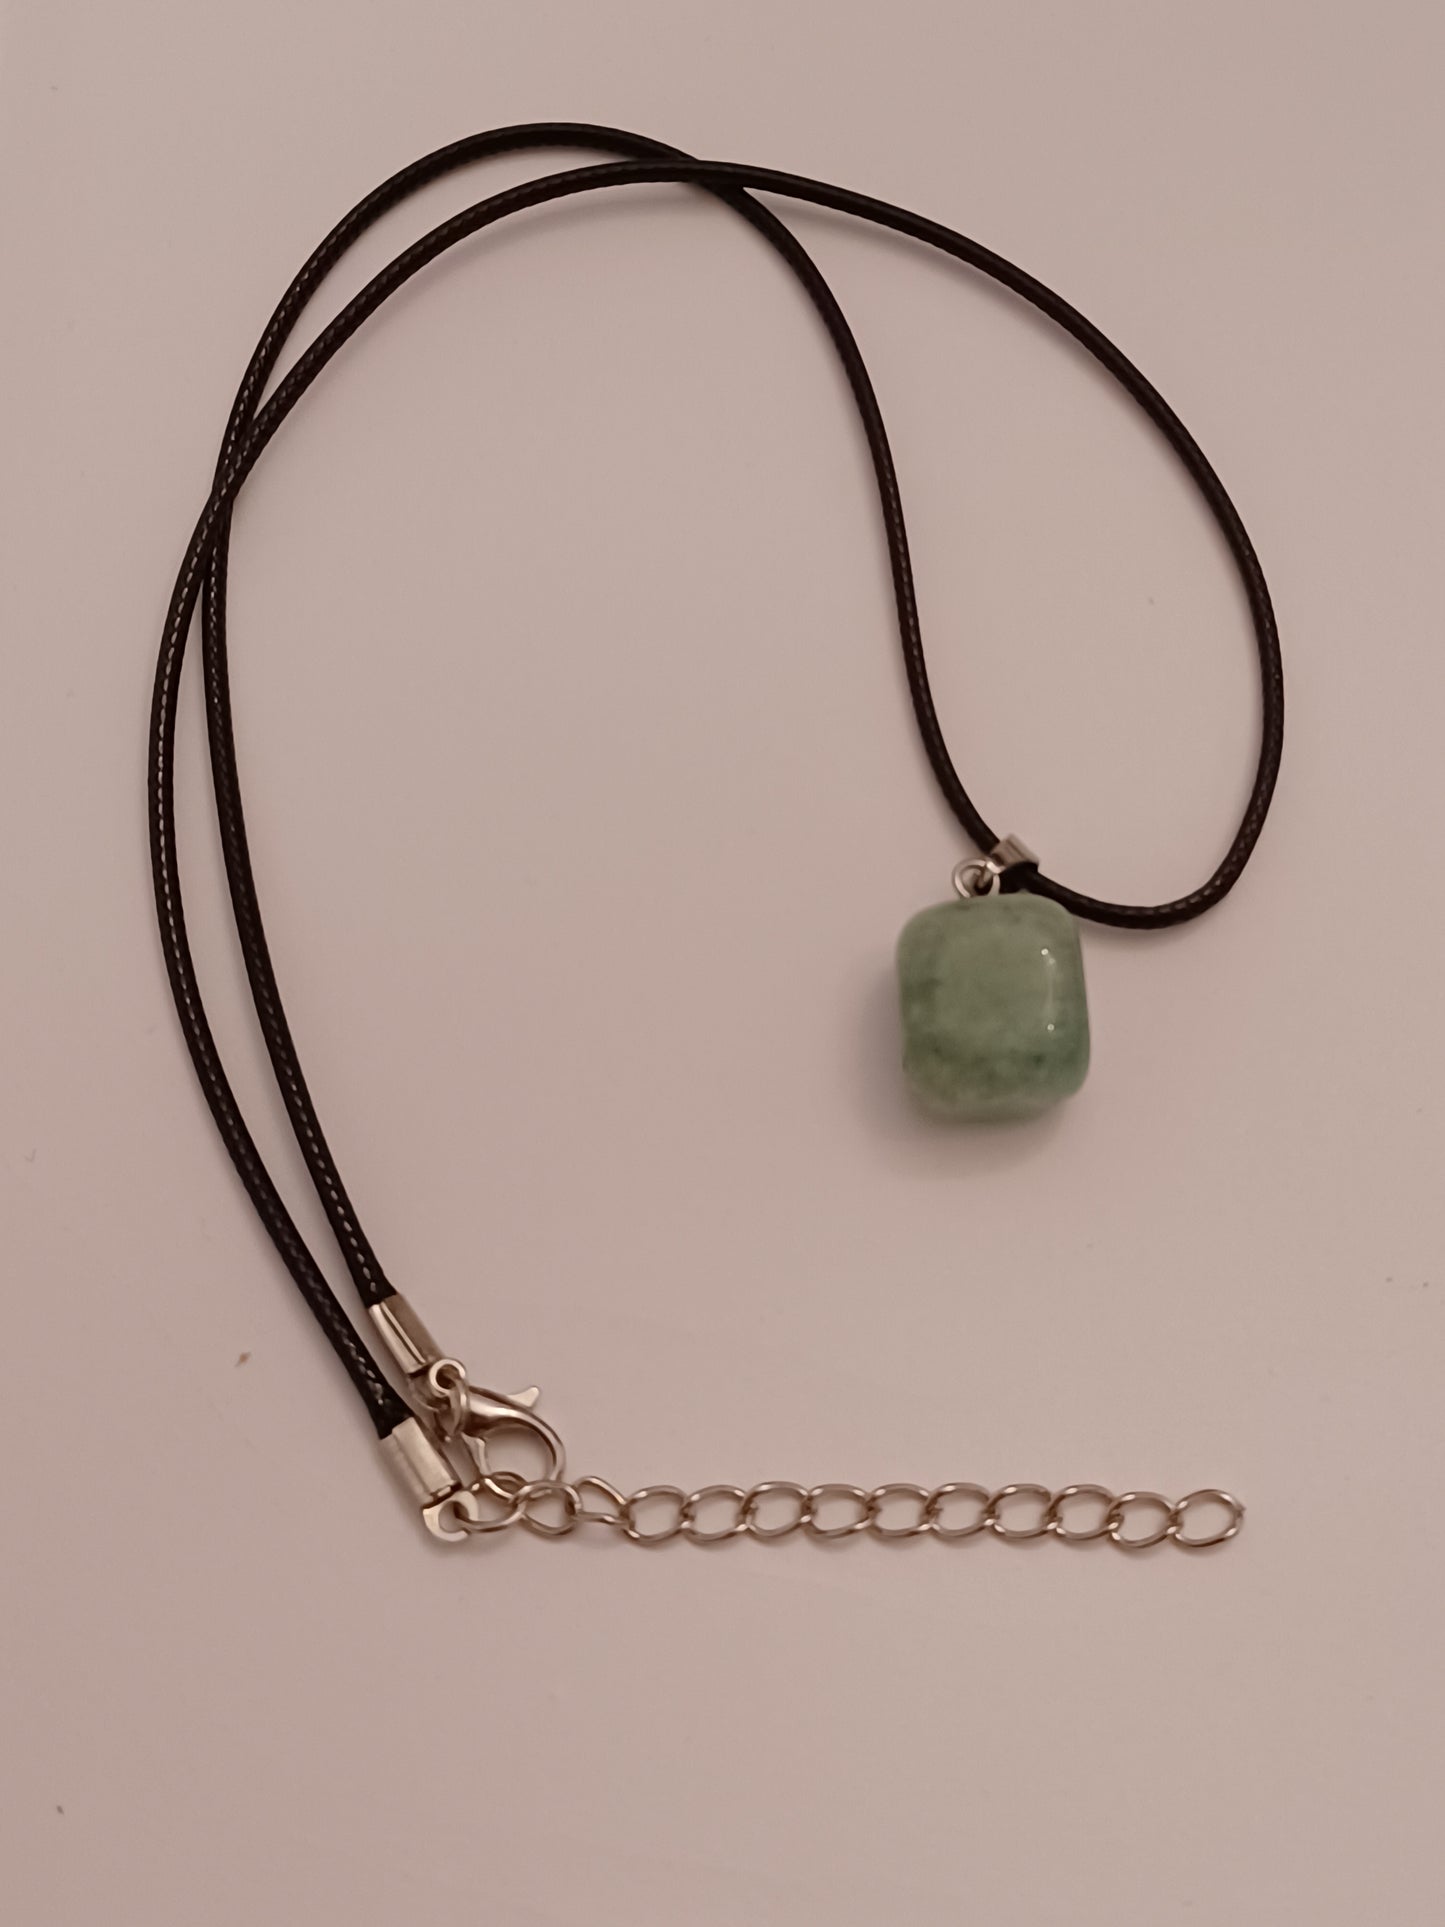 Green Aventurine Pendant with Paracord